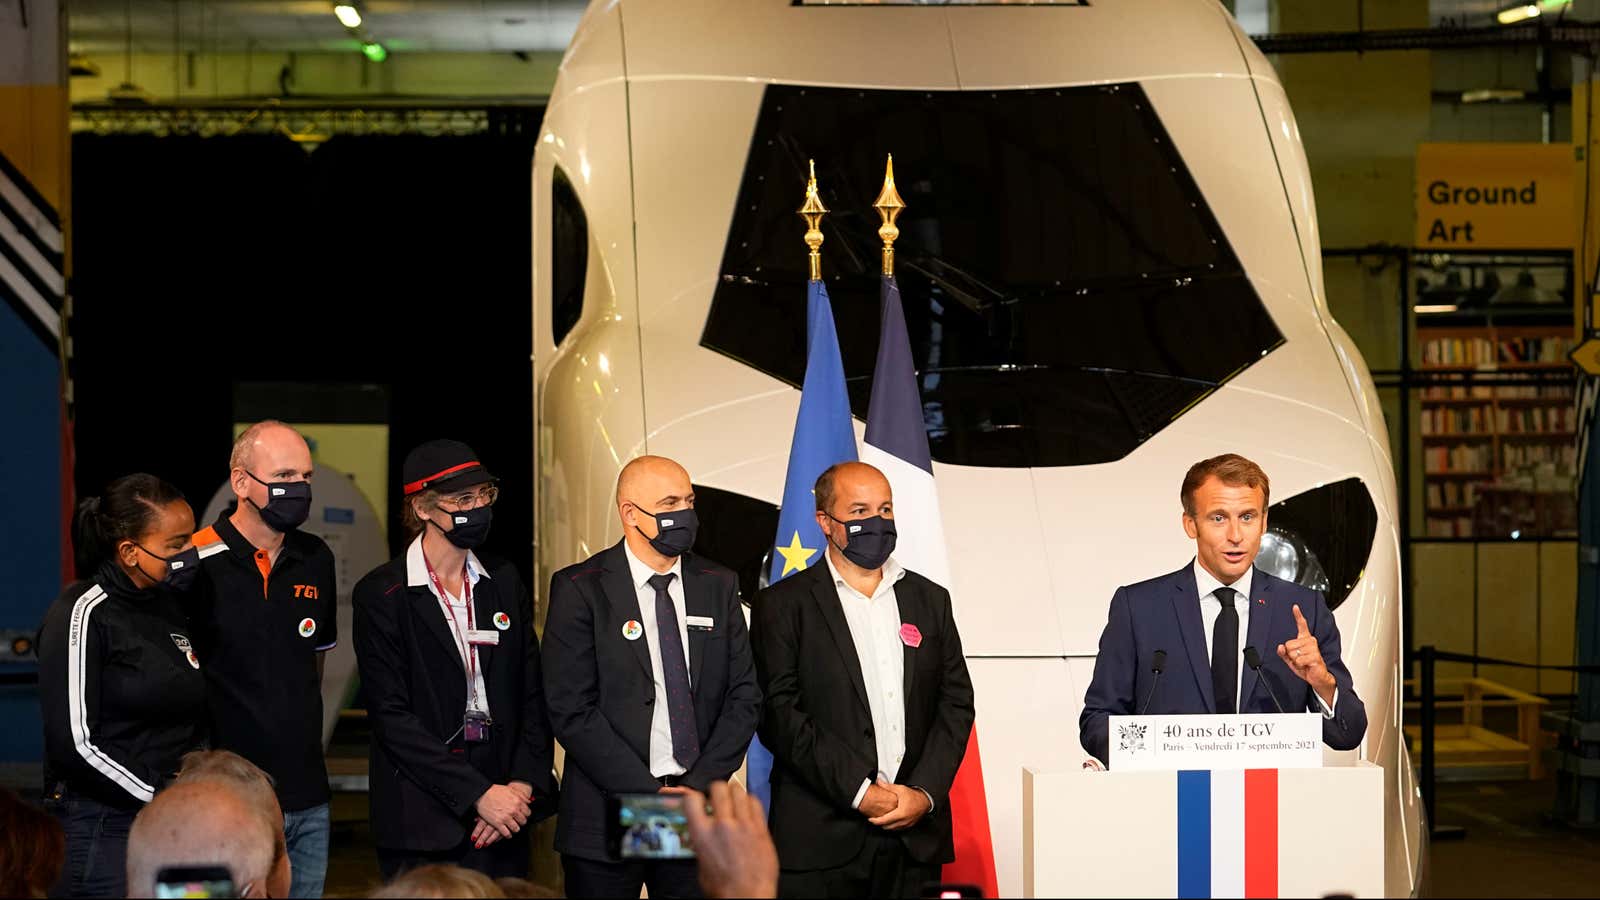 French President Emmanuel Macron speaks in front of a life-size replica of the next high-speed train TGV at the Gare de Lyon station.